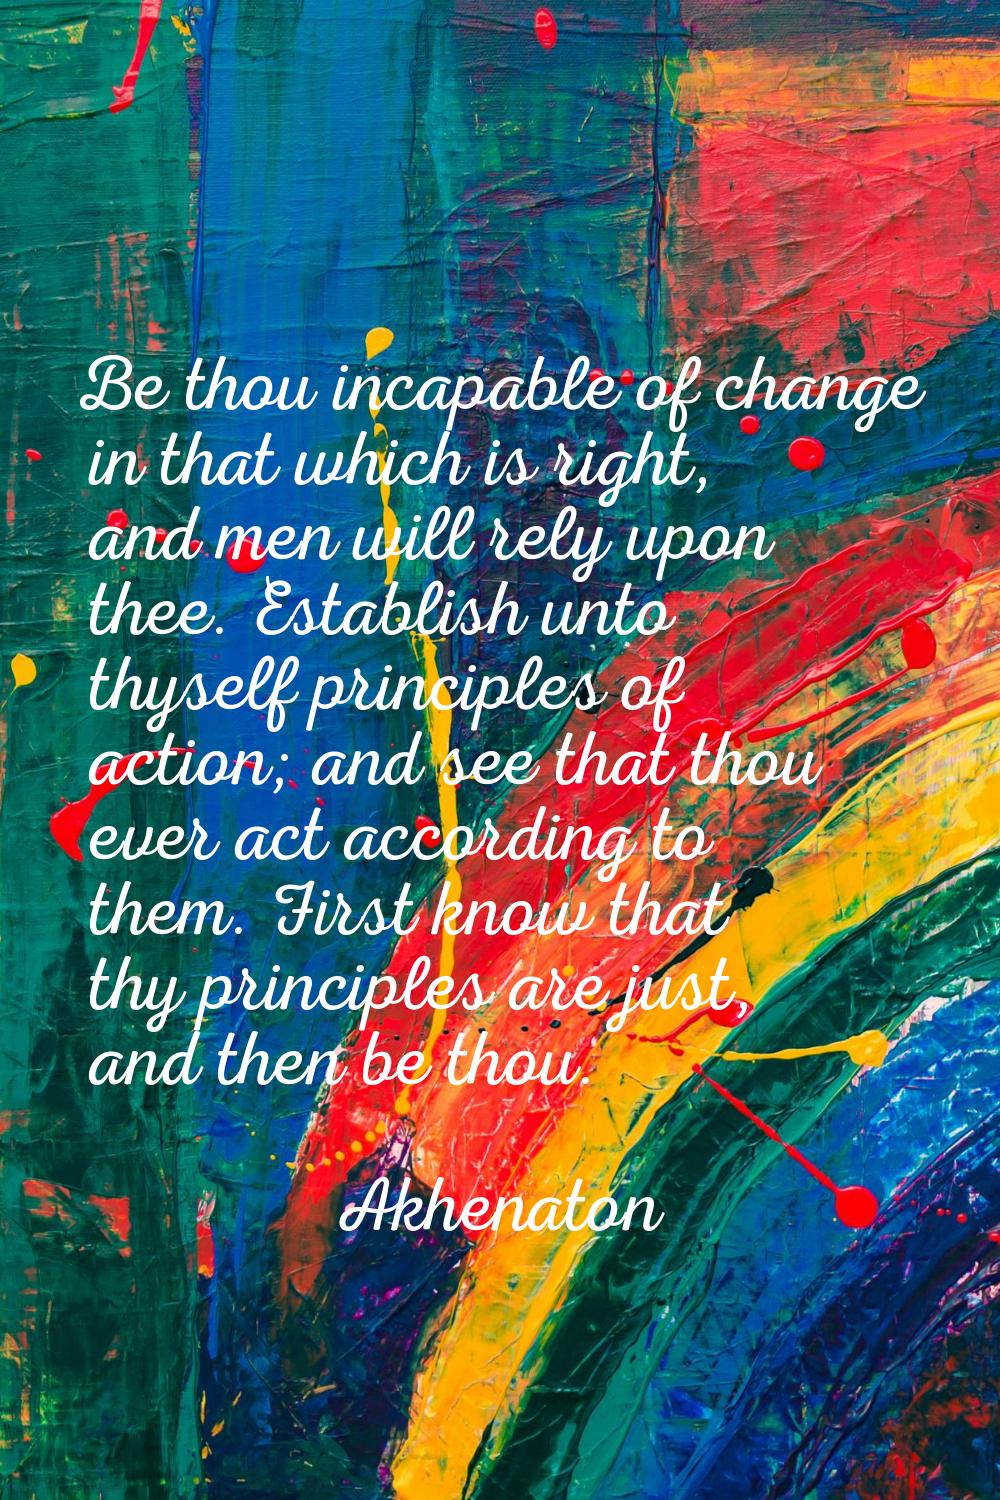 Be thou incapable of change in that which is right, and men will rely upon thee. Establish unto thy